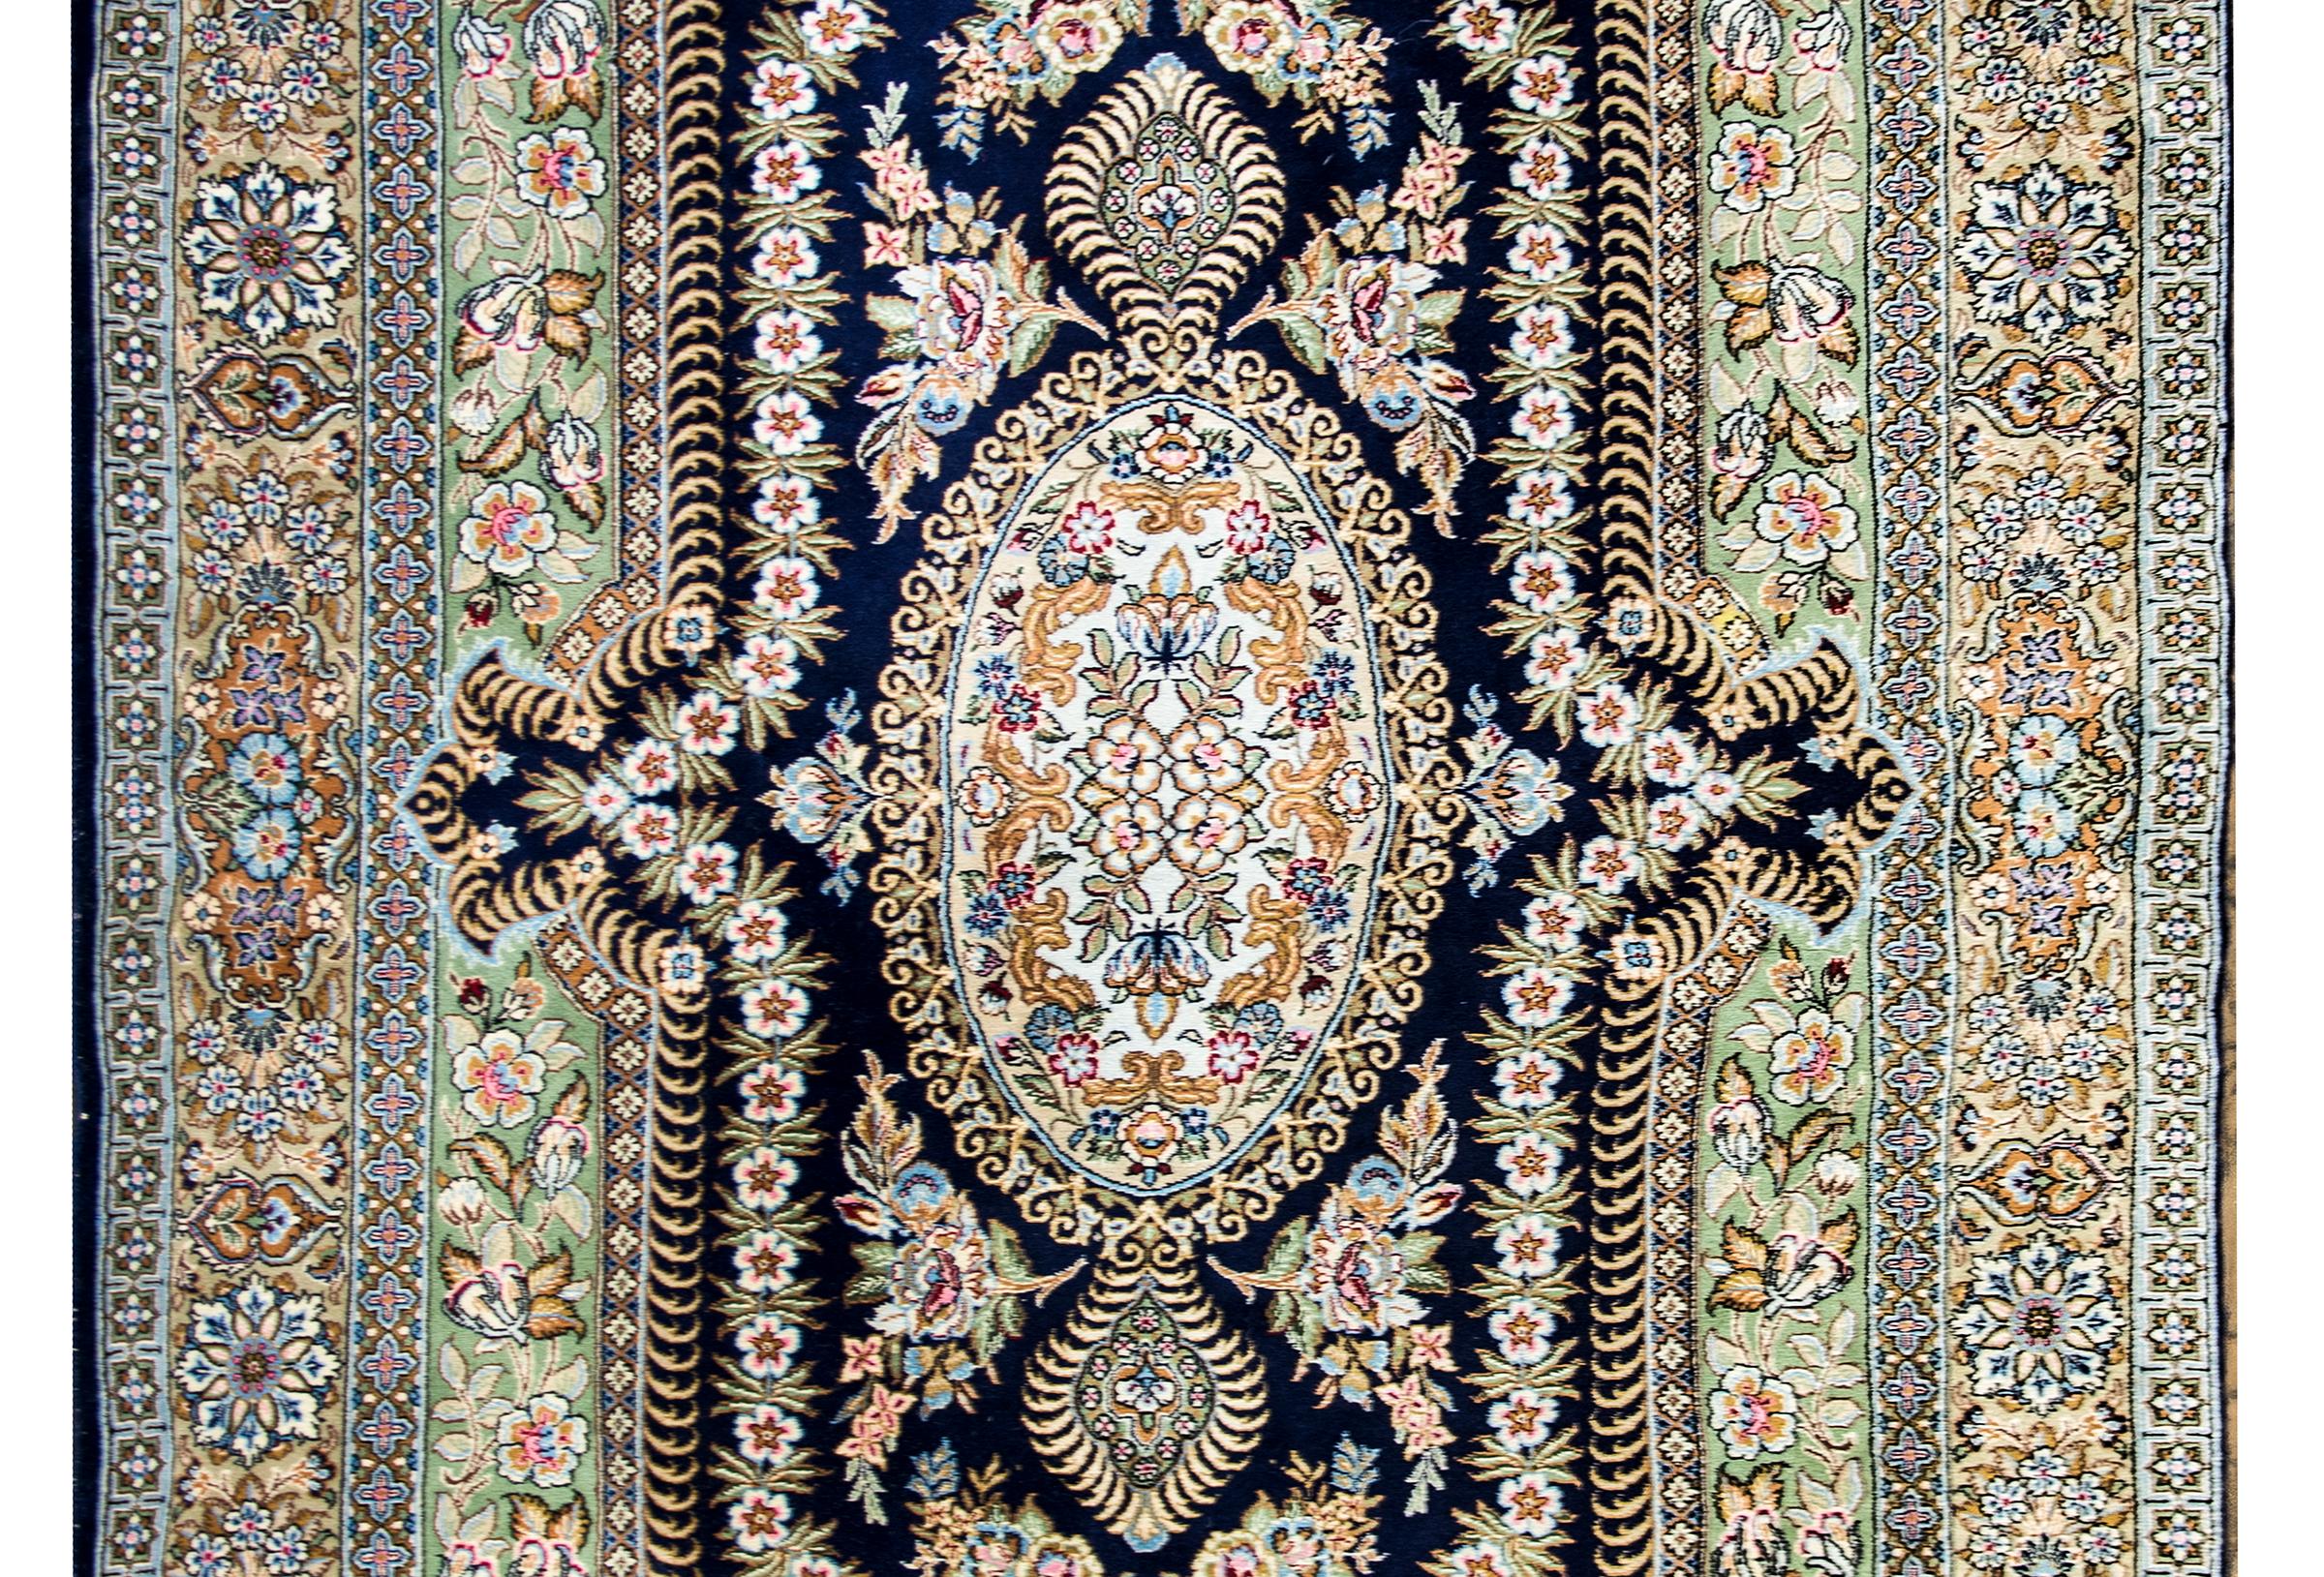 A lovely late 20th century Persian Rum rug with an intensely woven floral medallion with a lively energy, and surrounded by a complex border of wide and narrow floral patterned stripes.